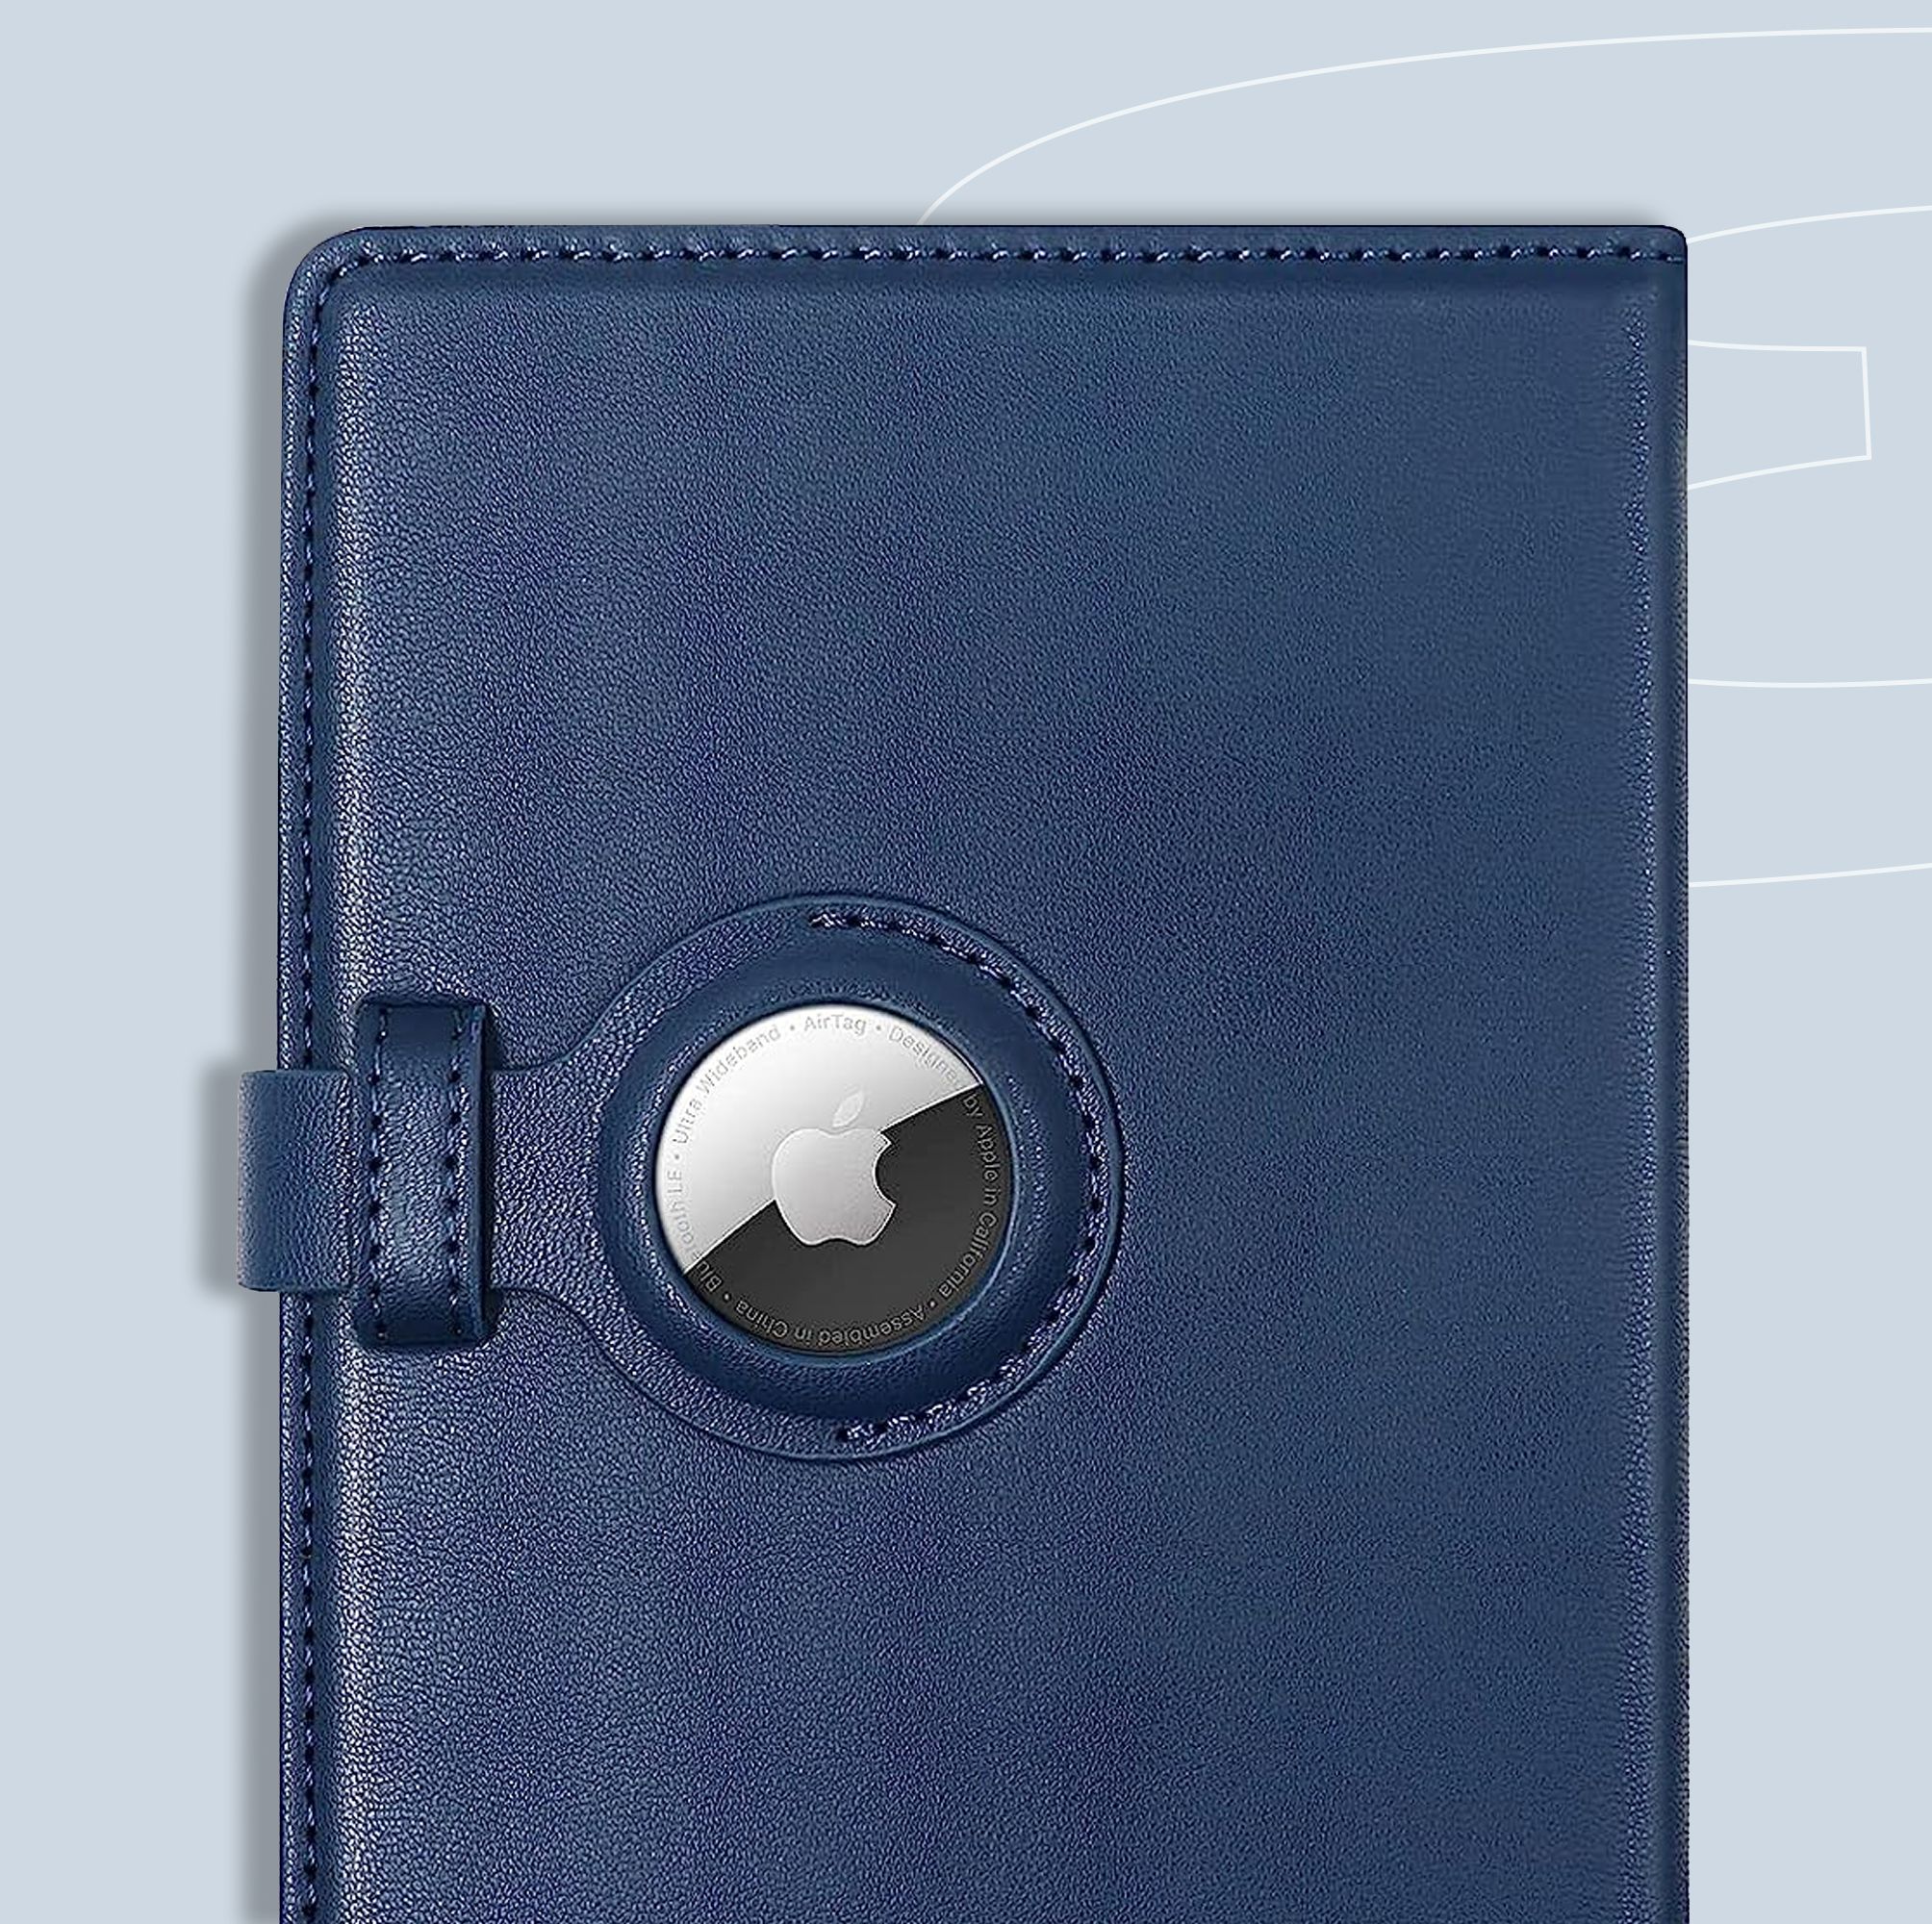 14 AirTag Wallets That'll Keep You at Ease On the Go